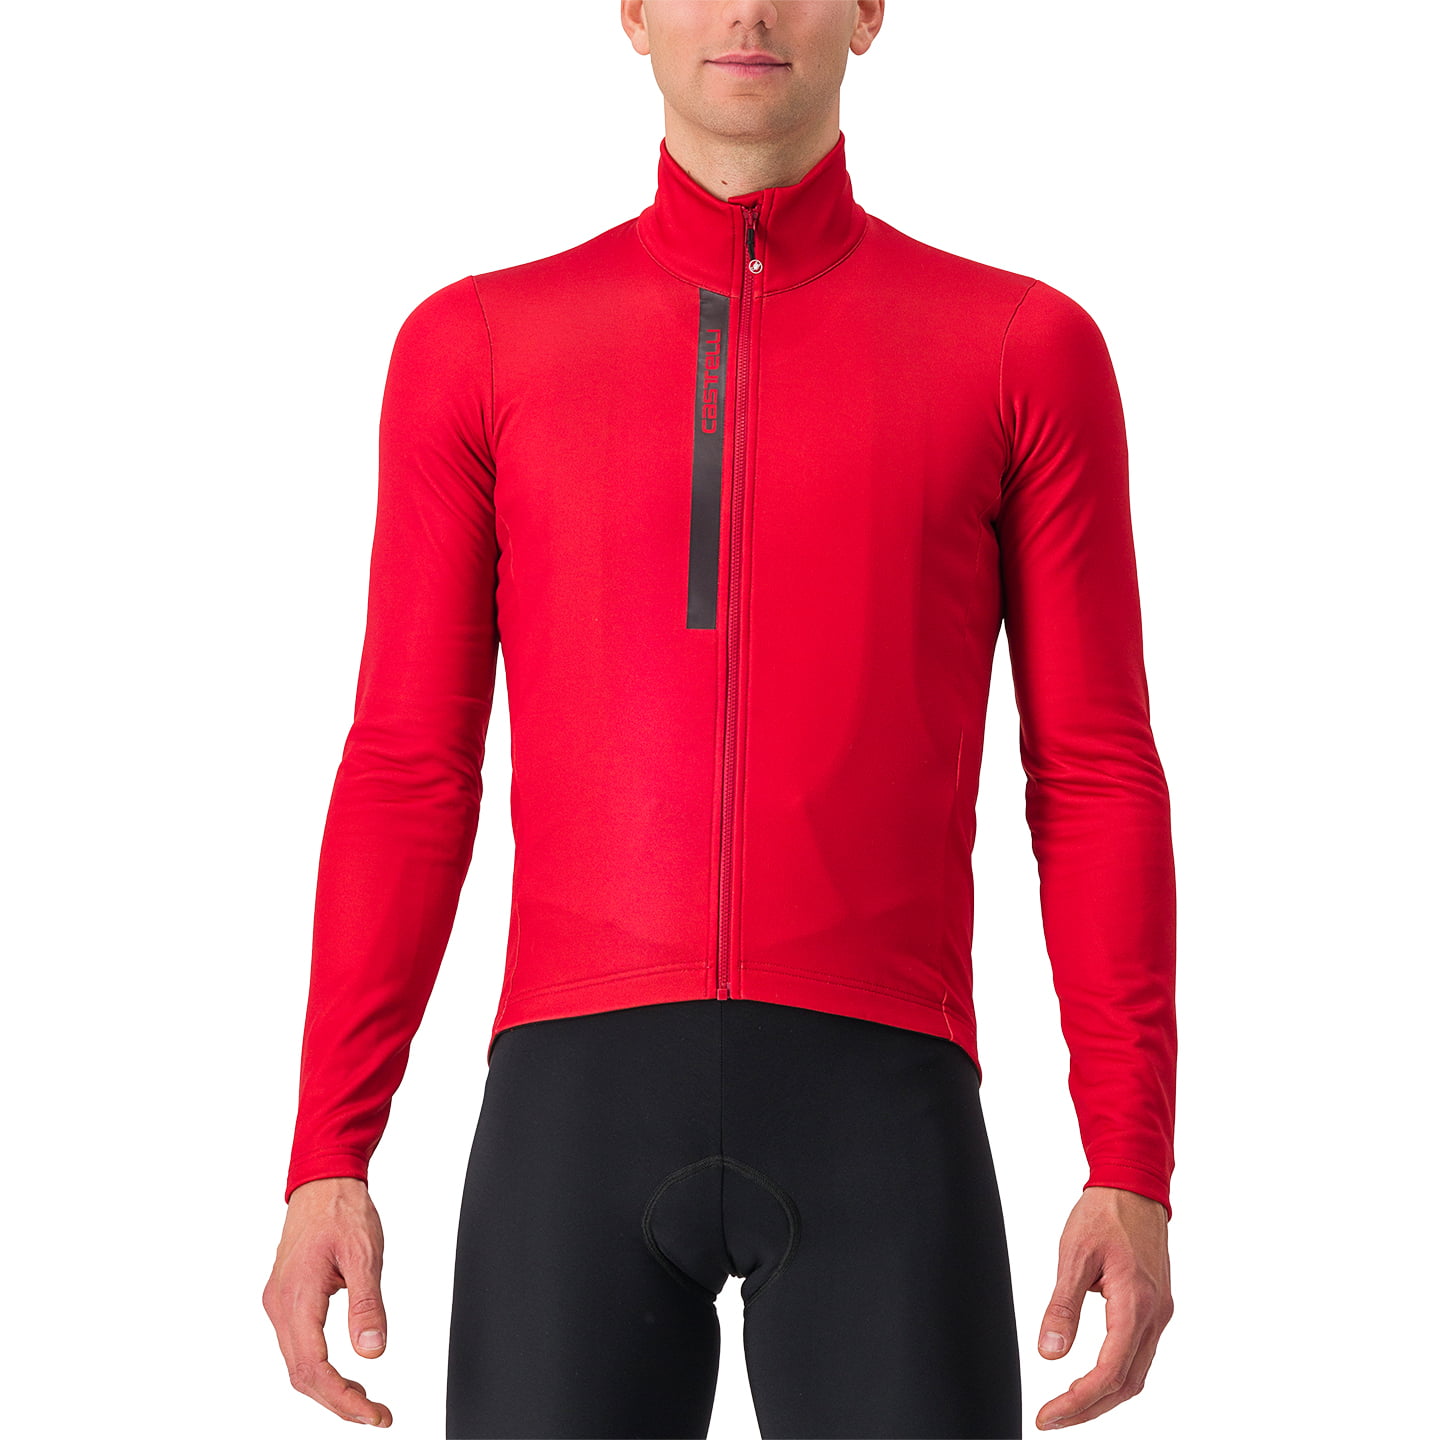 CASTELLI Entrata Thermal long-sleeved jersey Long Sleeve Jersey, for men, size 2XL, Cycling jersey, Cycle clothing